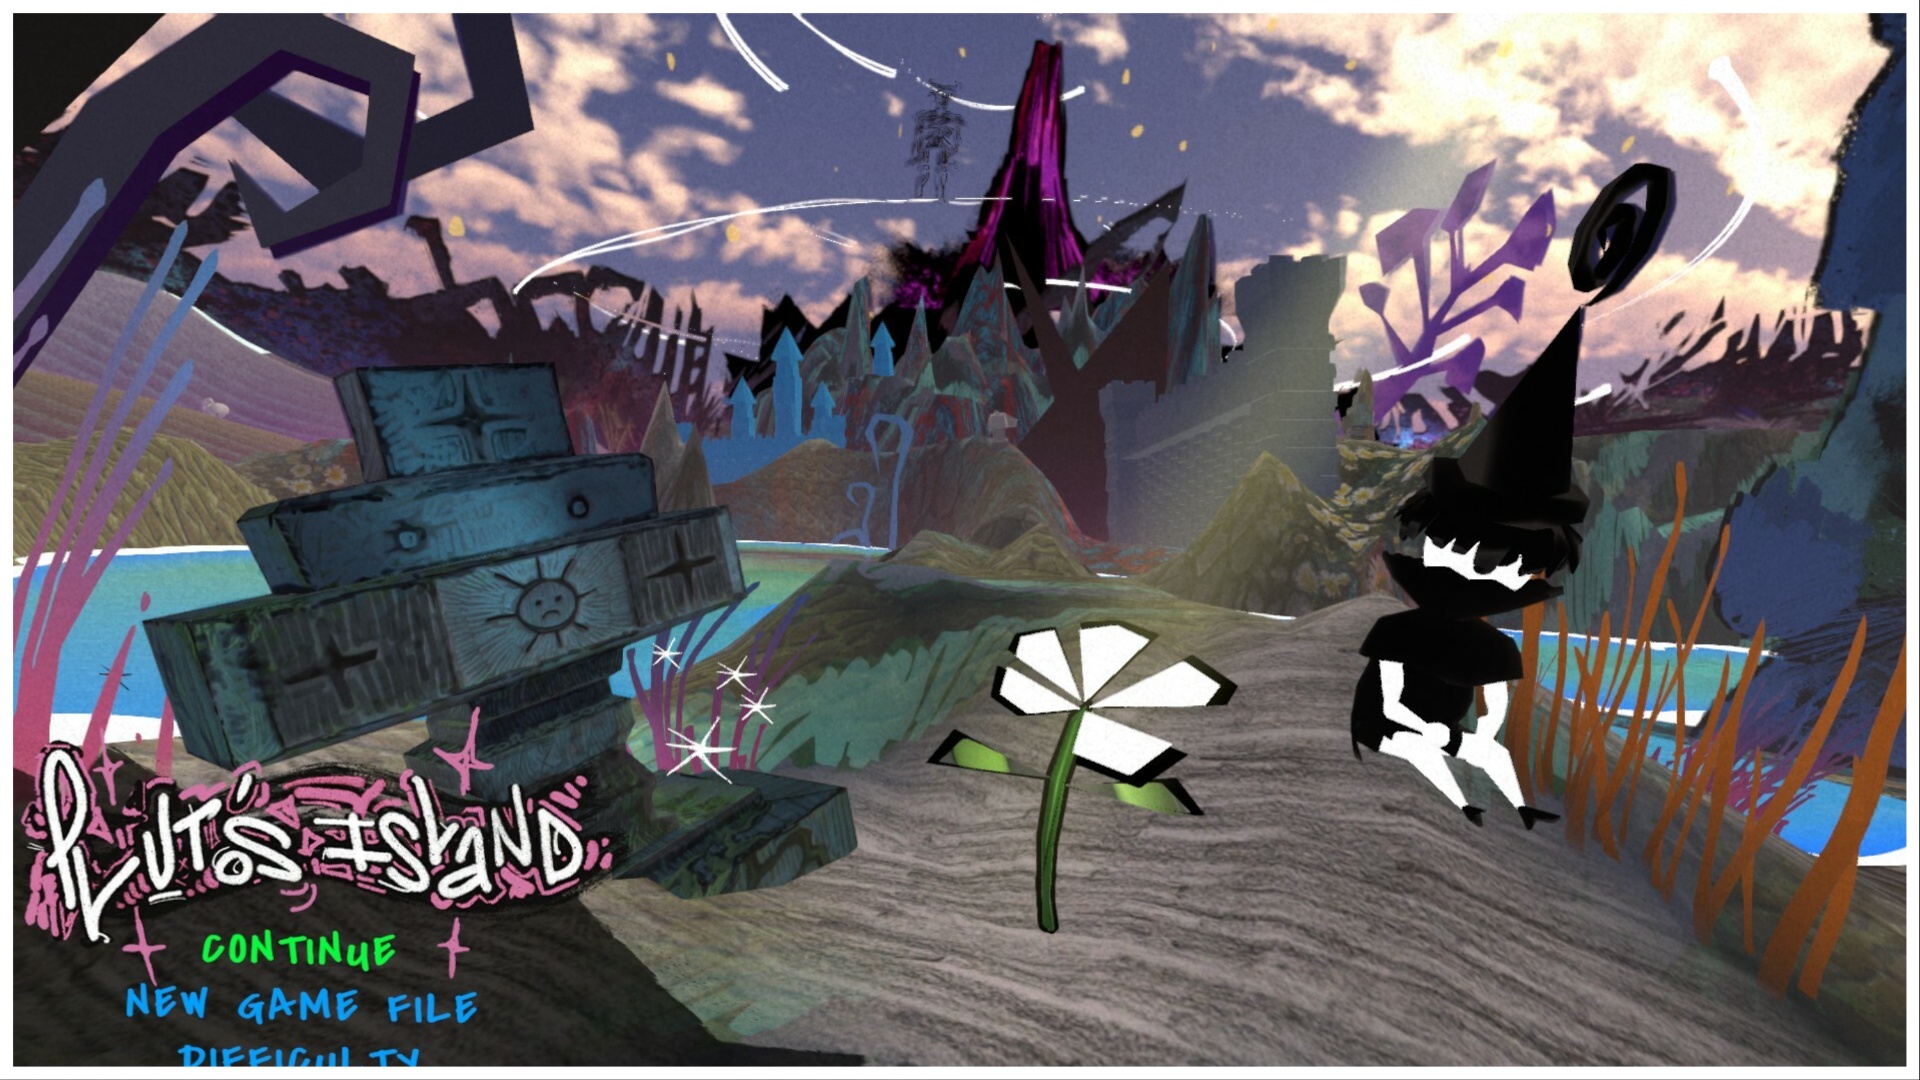 Pluto’s Island Is A Strange Artsy Game That Launches Soon!